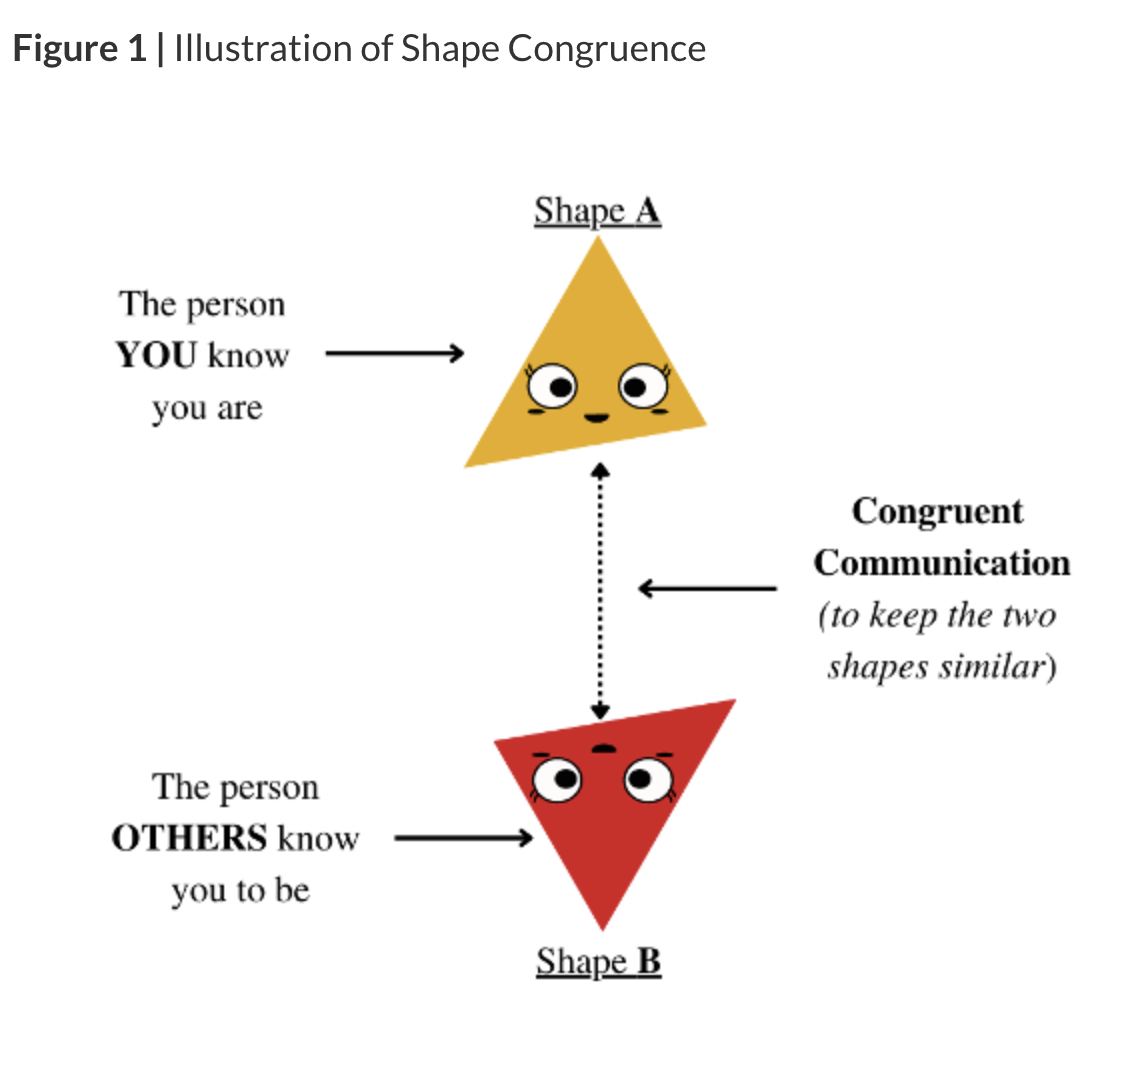 This image depicts shape congruence. Shape A represents "the person YOU know you are." Shape B represents "the person OTHERS know you to be." Shape B is the same shape but oriented differently from Shape A. A two way arrow between the shapes represent "Congruent Communication."